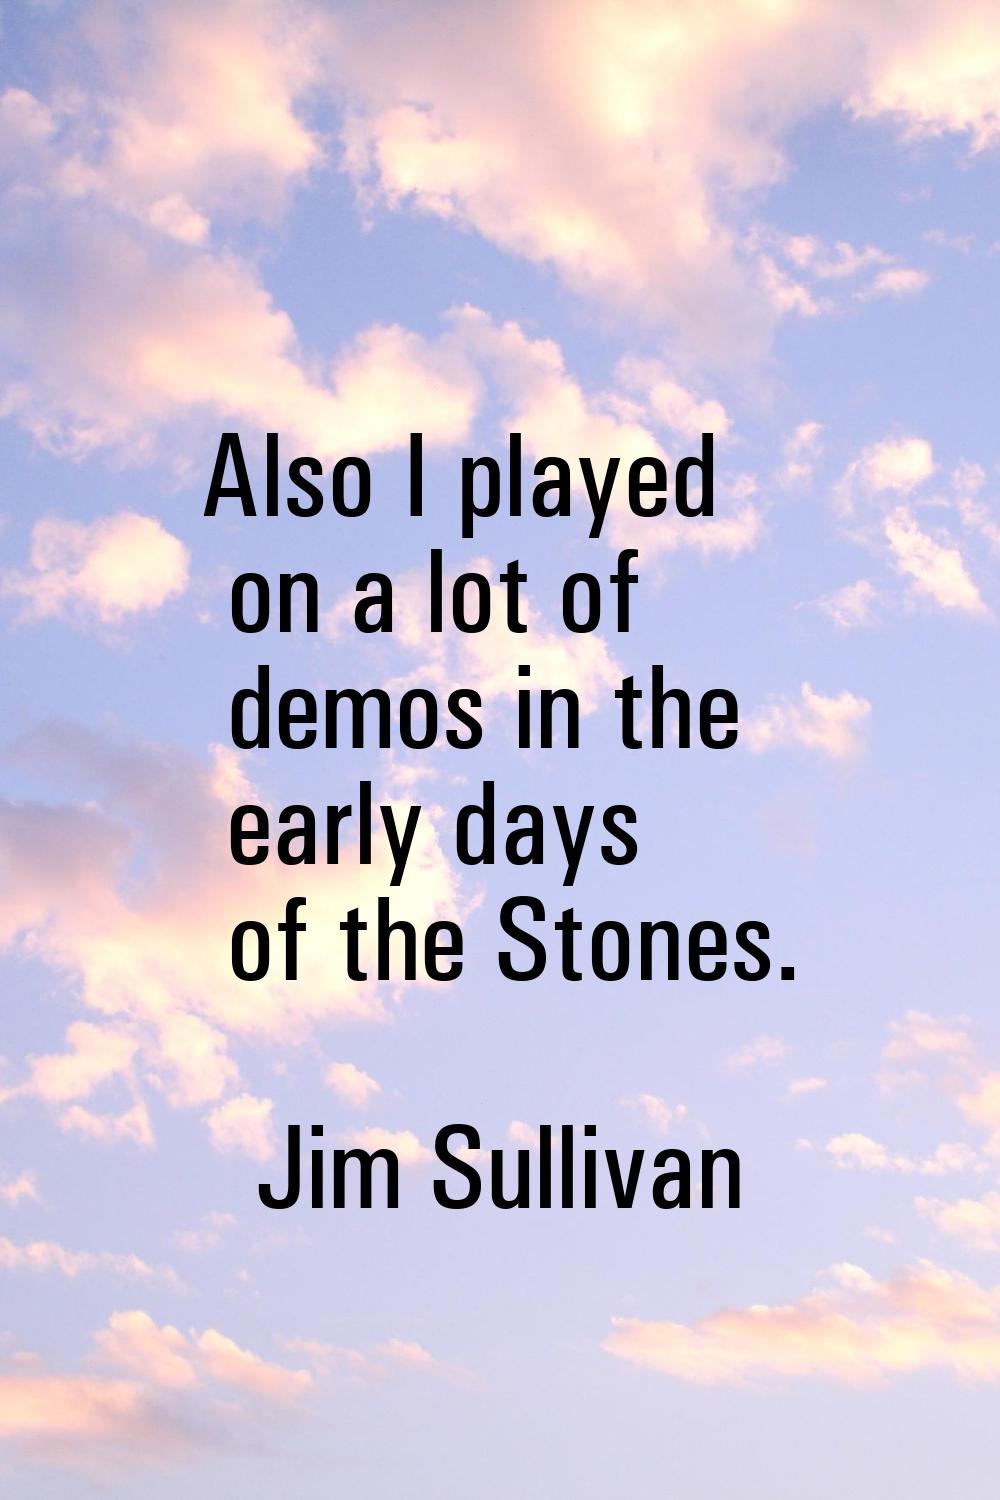 Also I played on a lot of demos in the early days of the Stones.